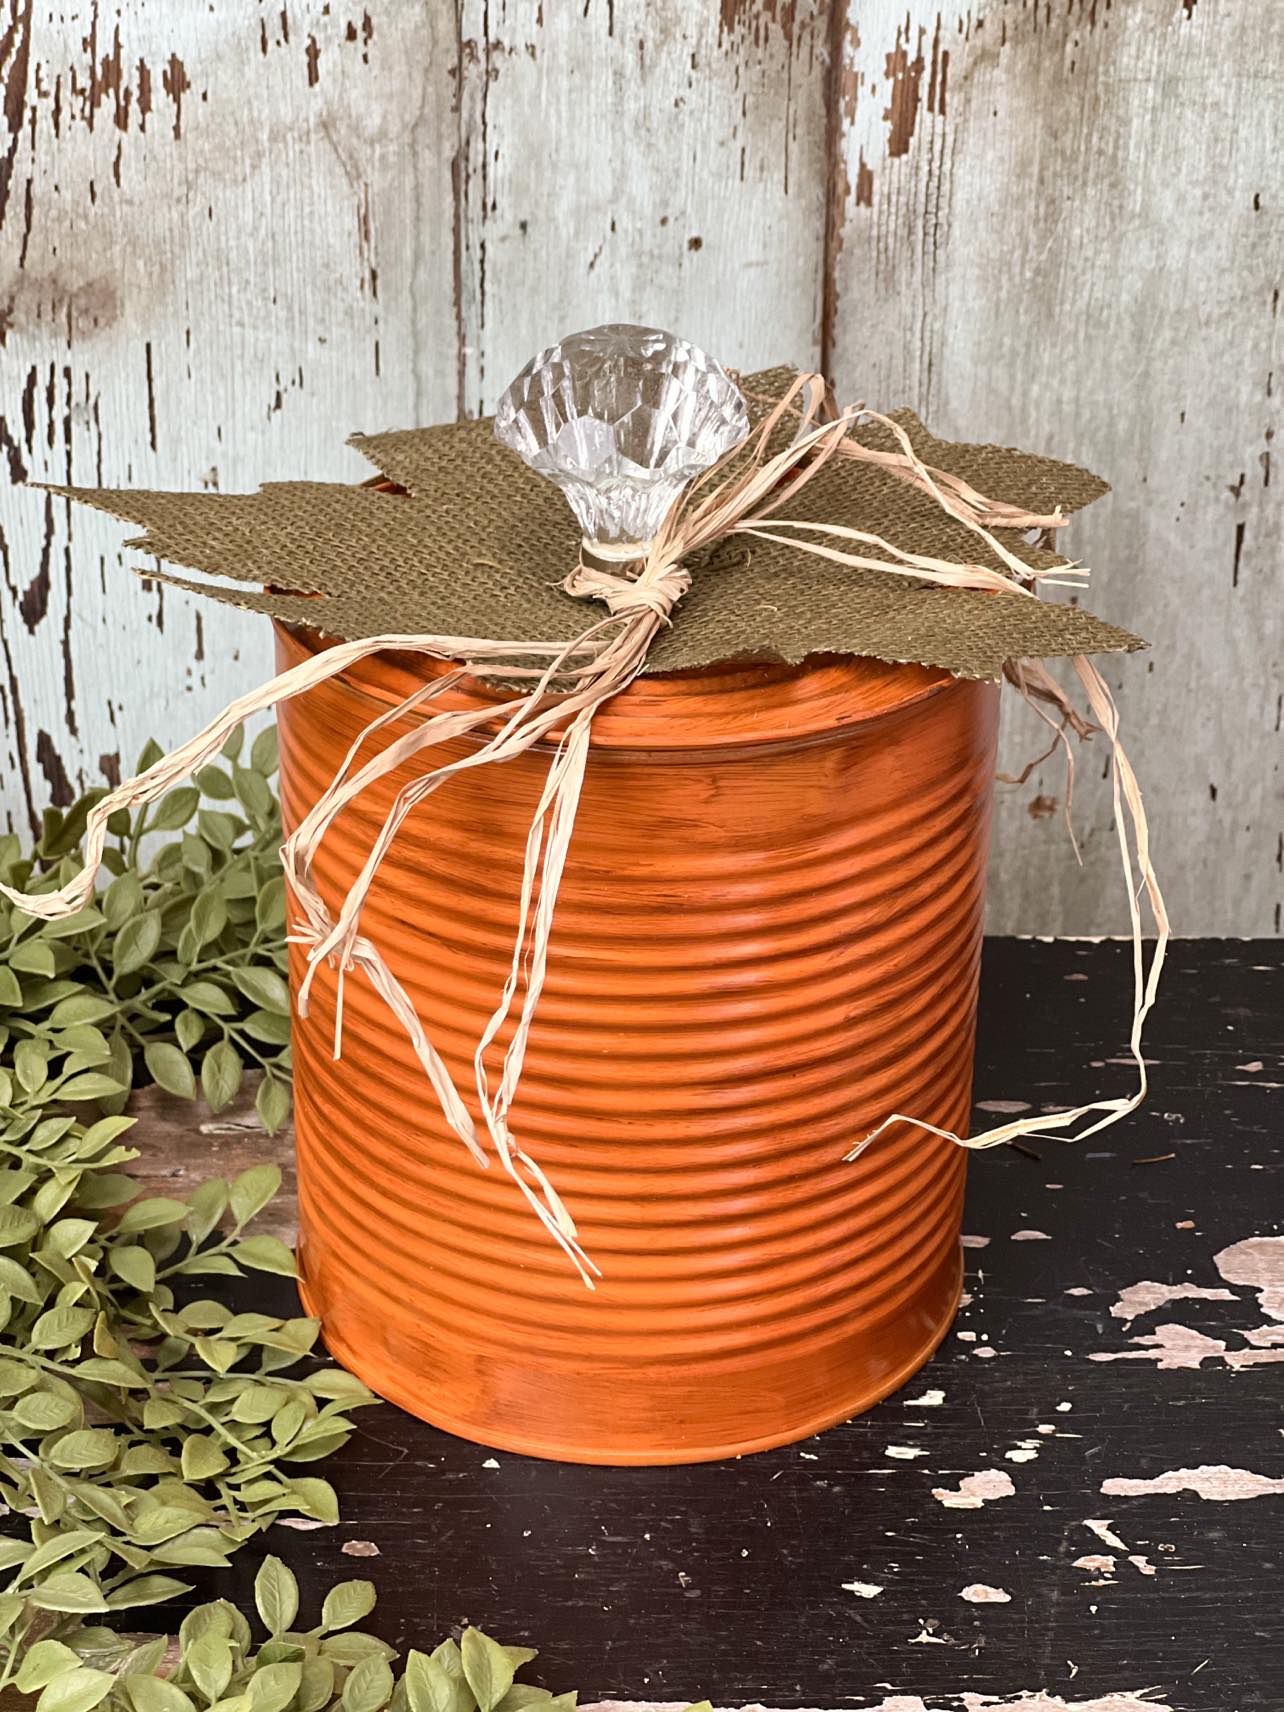 How To Make A Pumpkin Container - The Shabby Tree